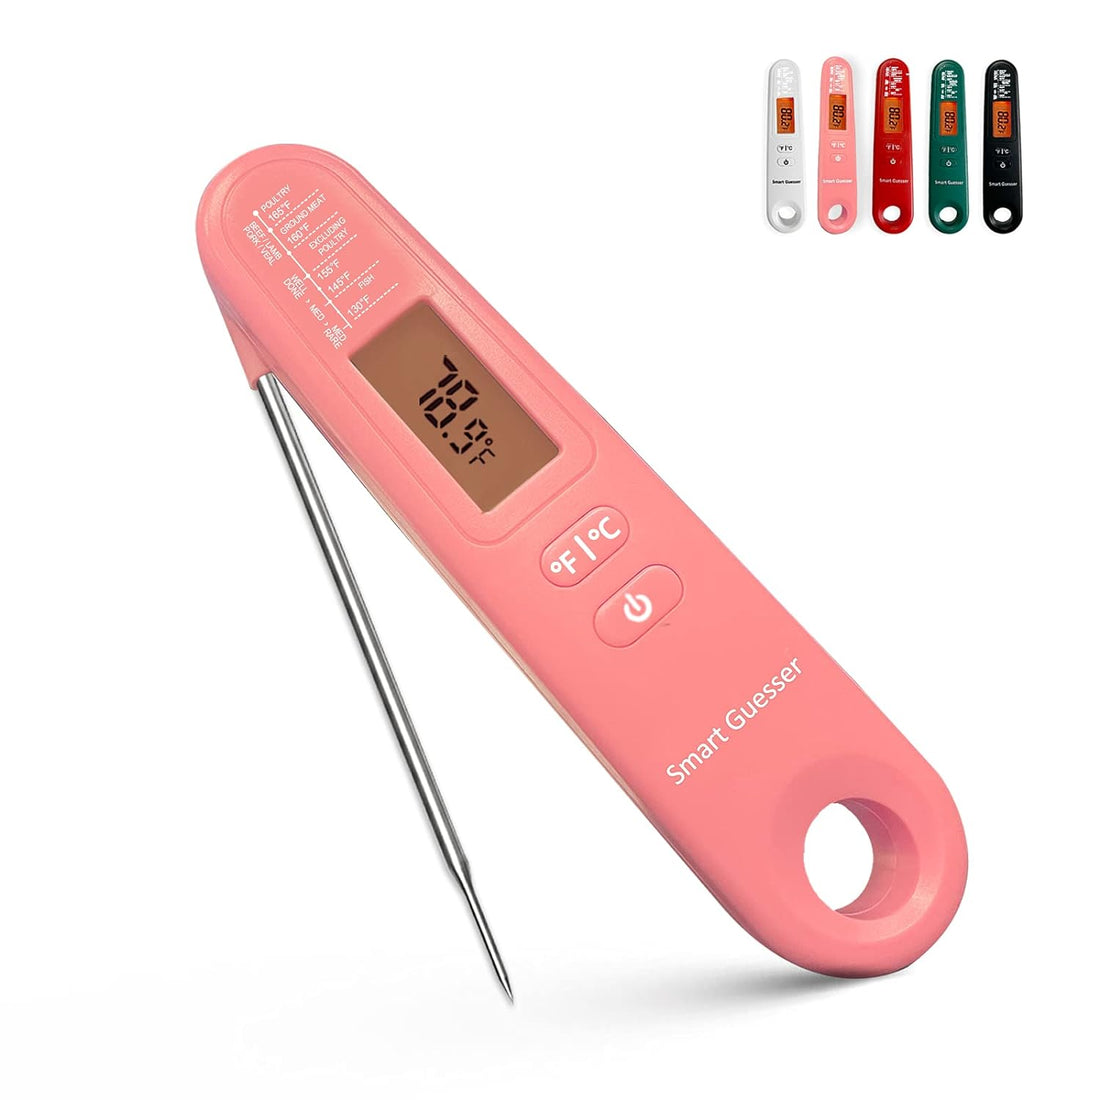 Smart Guesser Digital Meat Thermometer with Backlight for Kitchen Cooking-Instant Read Food Thermometer for Meat, Deep Frying, Baking,Grilling BBQ-Pink, (UIE-OT-104)